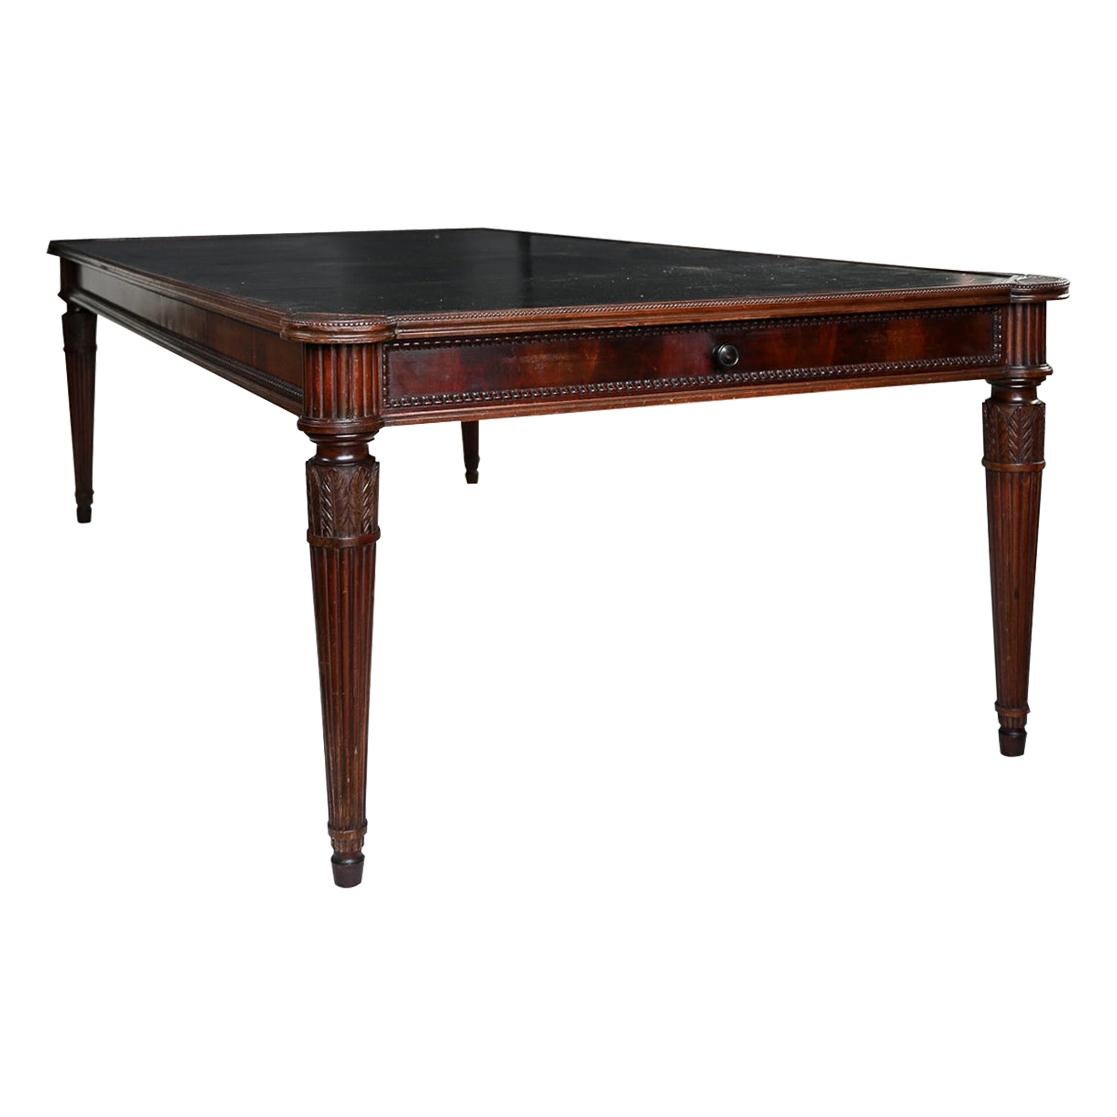 Large Italian Library Table in the 18th Century Style Ex Collection Pierre Bergé